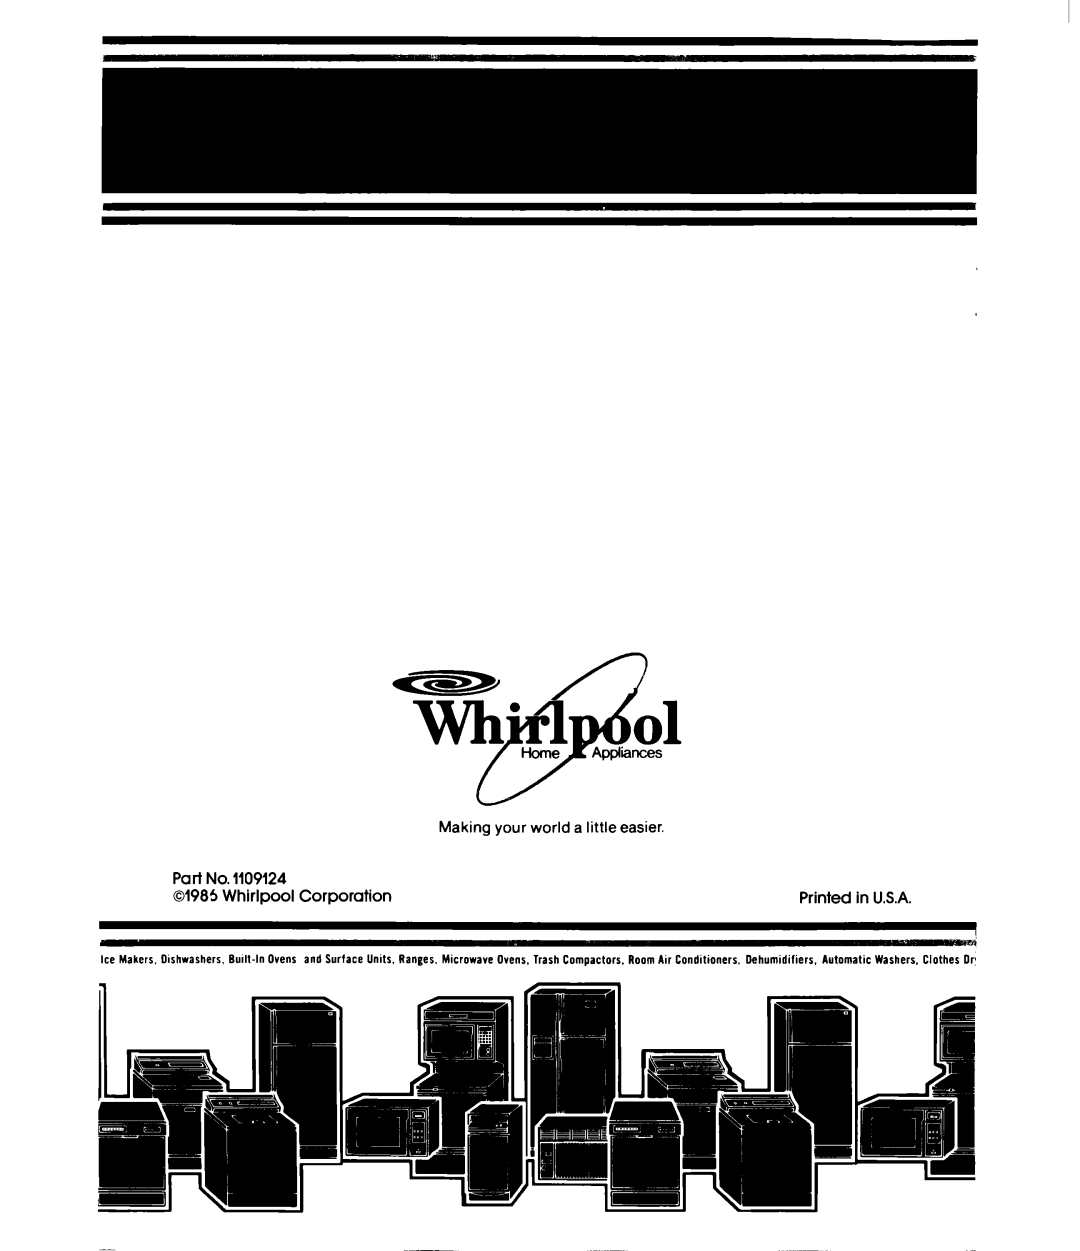 Whirlpool ET16JM manual Making your world a little easier, Whirlpool Corporation, Printed in U.S.A 